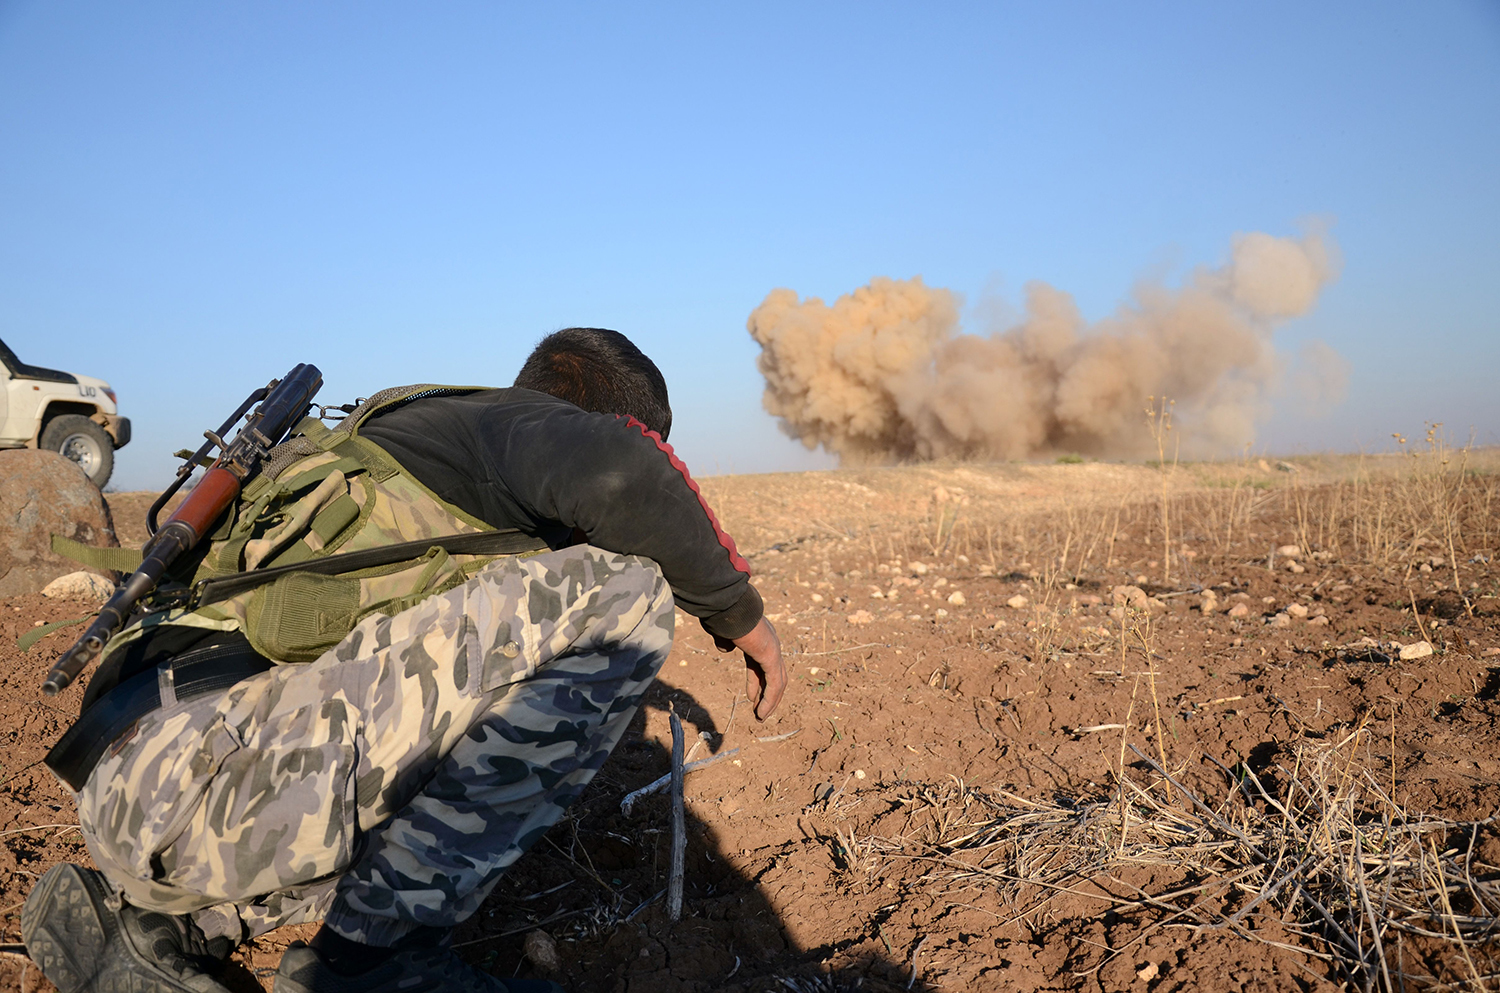 TOPSHOT - A rebel fighter reacts as a landmine, planted by Islamic State (IS) group jihadists, is exploded by his comrades in the village of Tilalayn on the western outskirts of the northern Syrian town of Dabiq, on November 25, 2016. / AFP PHOTO / Nazeer al-Khatib / TT / kod 444